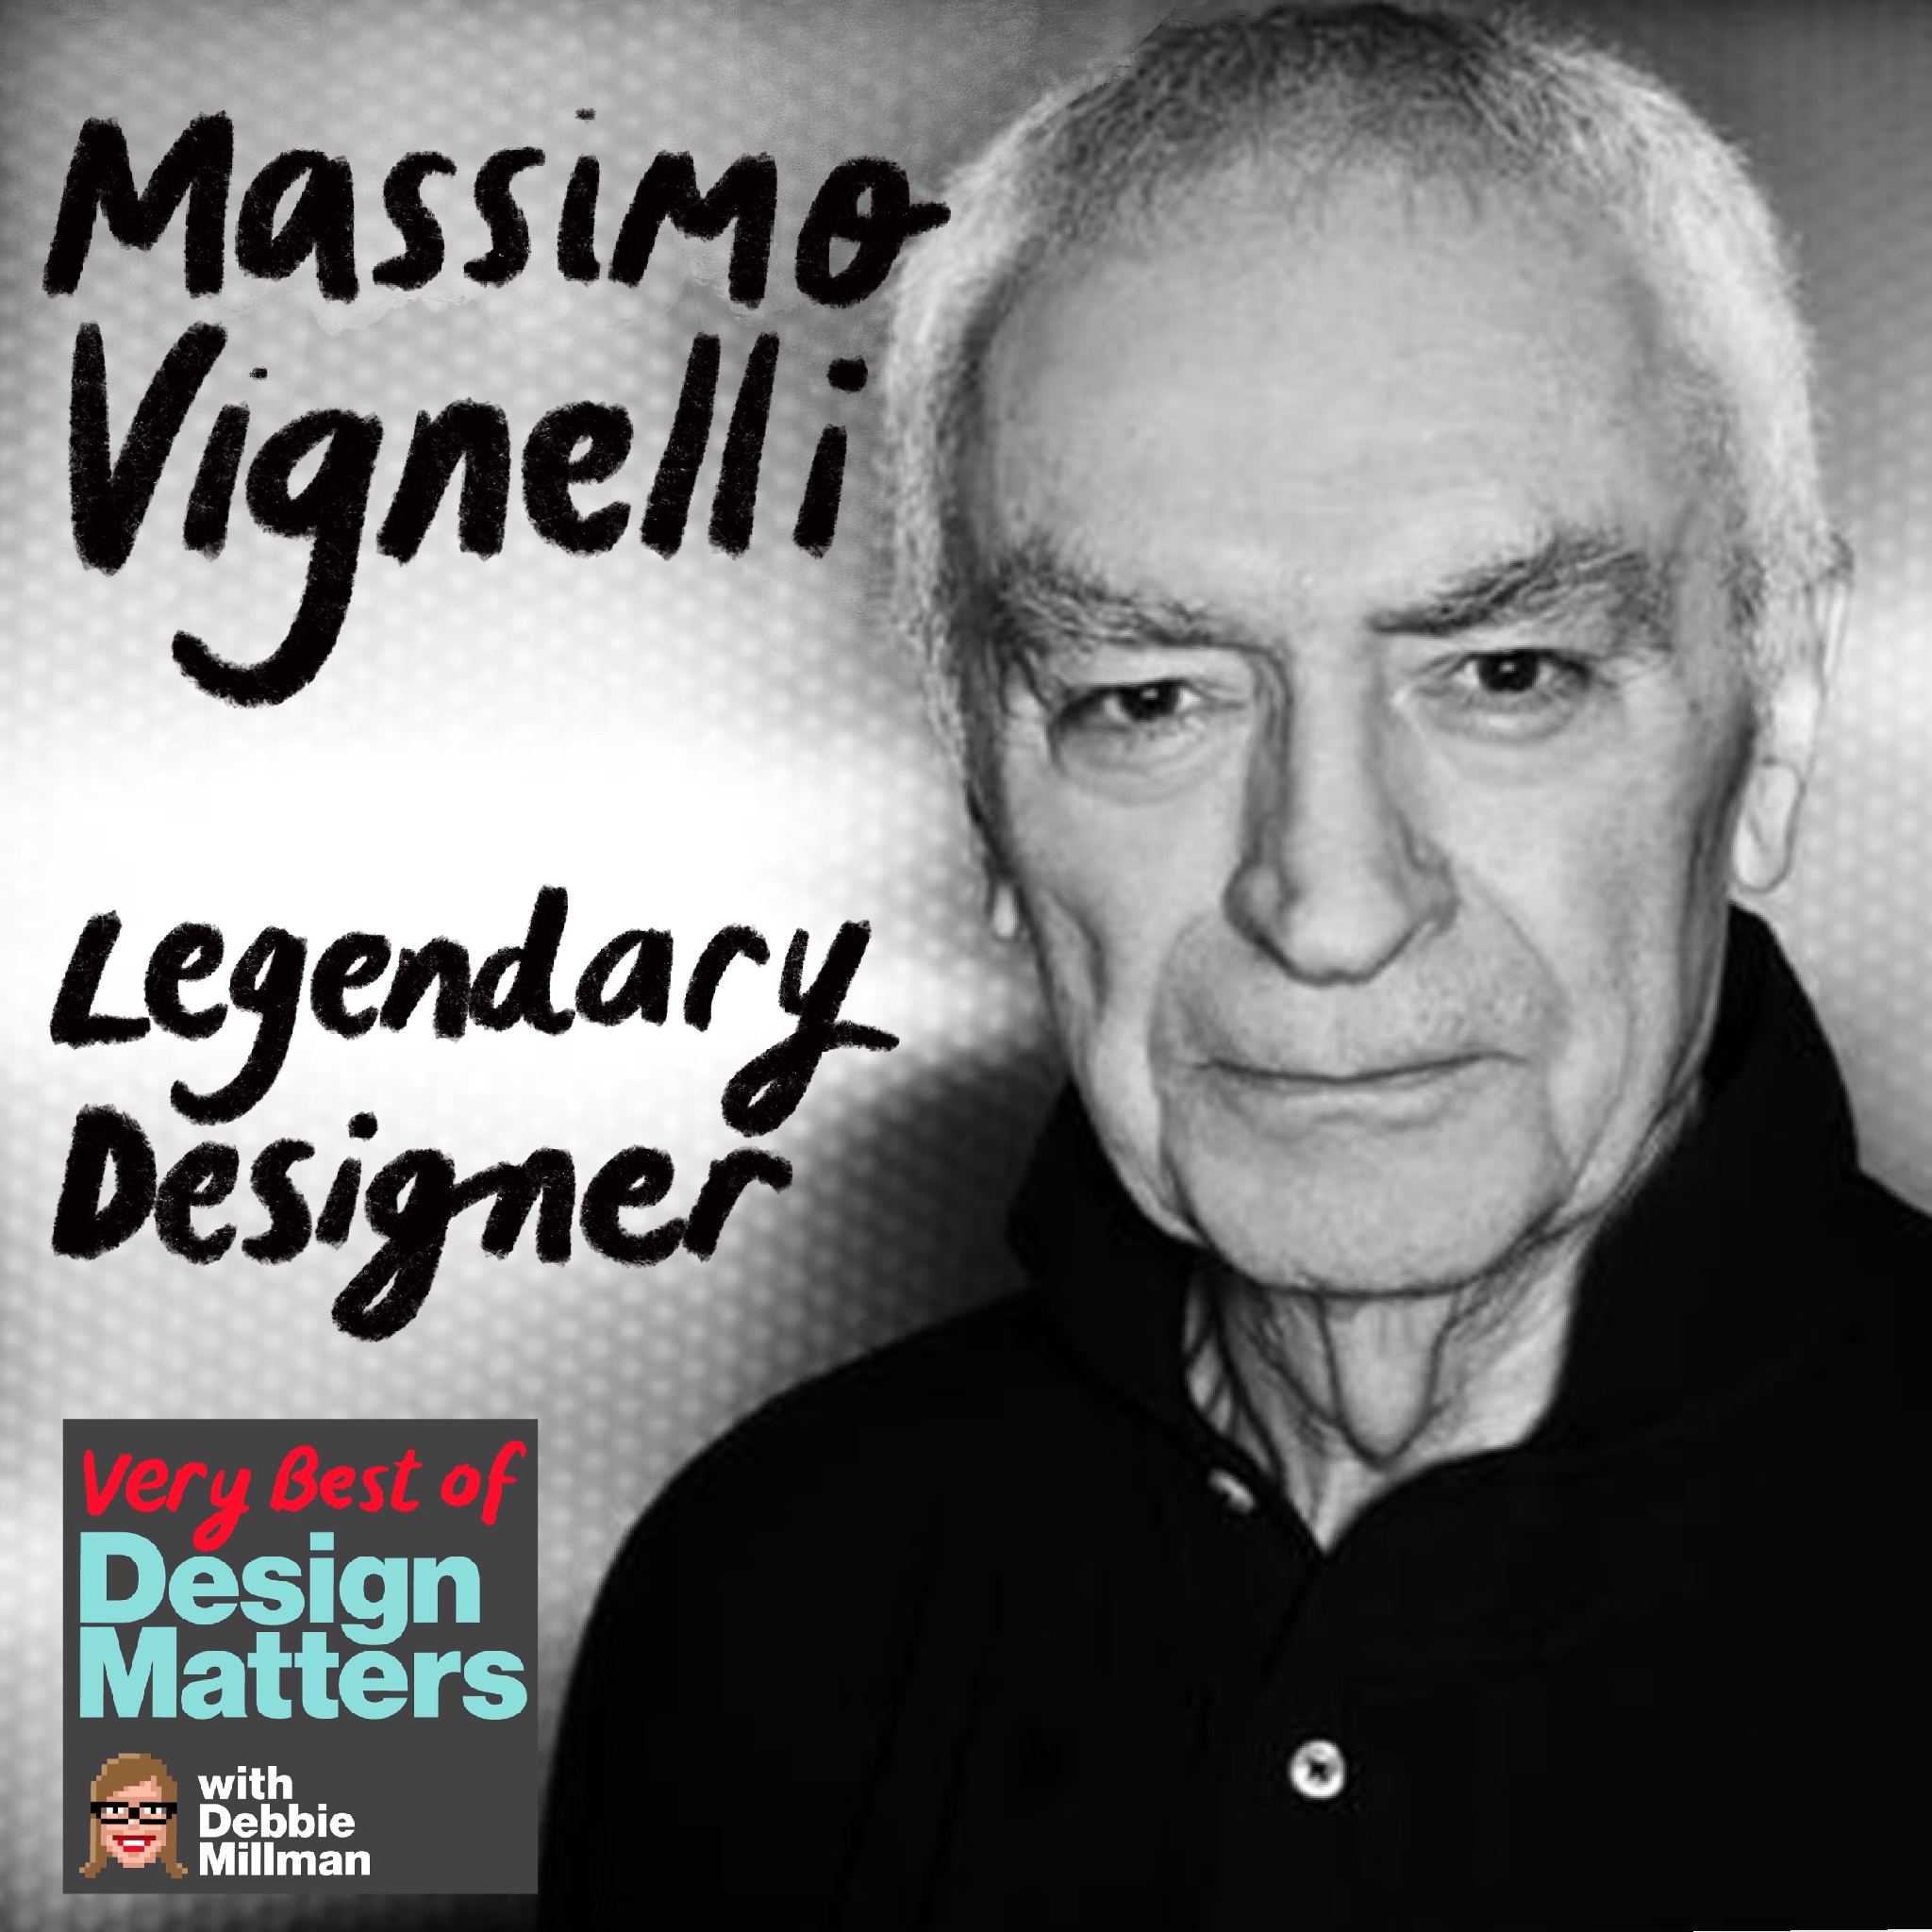 From the Archive: Massimo Vignelli